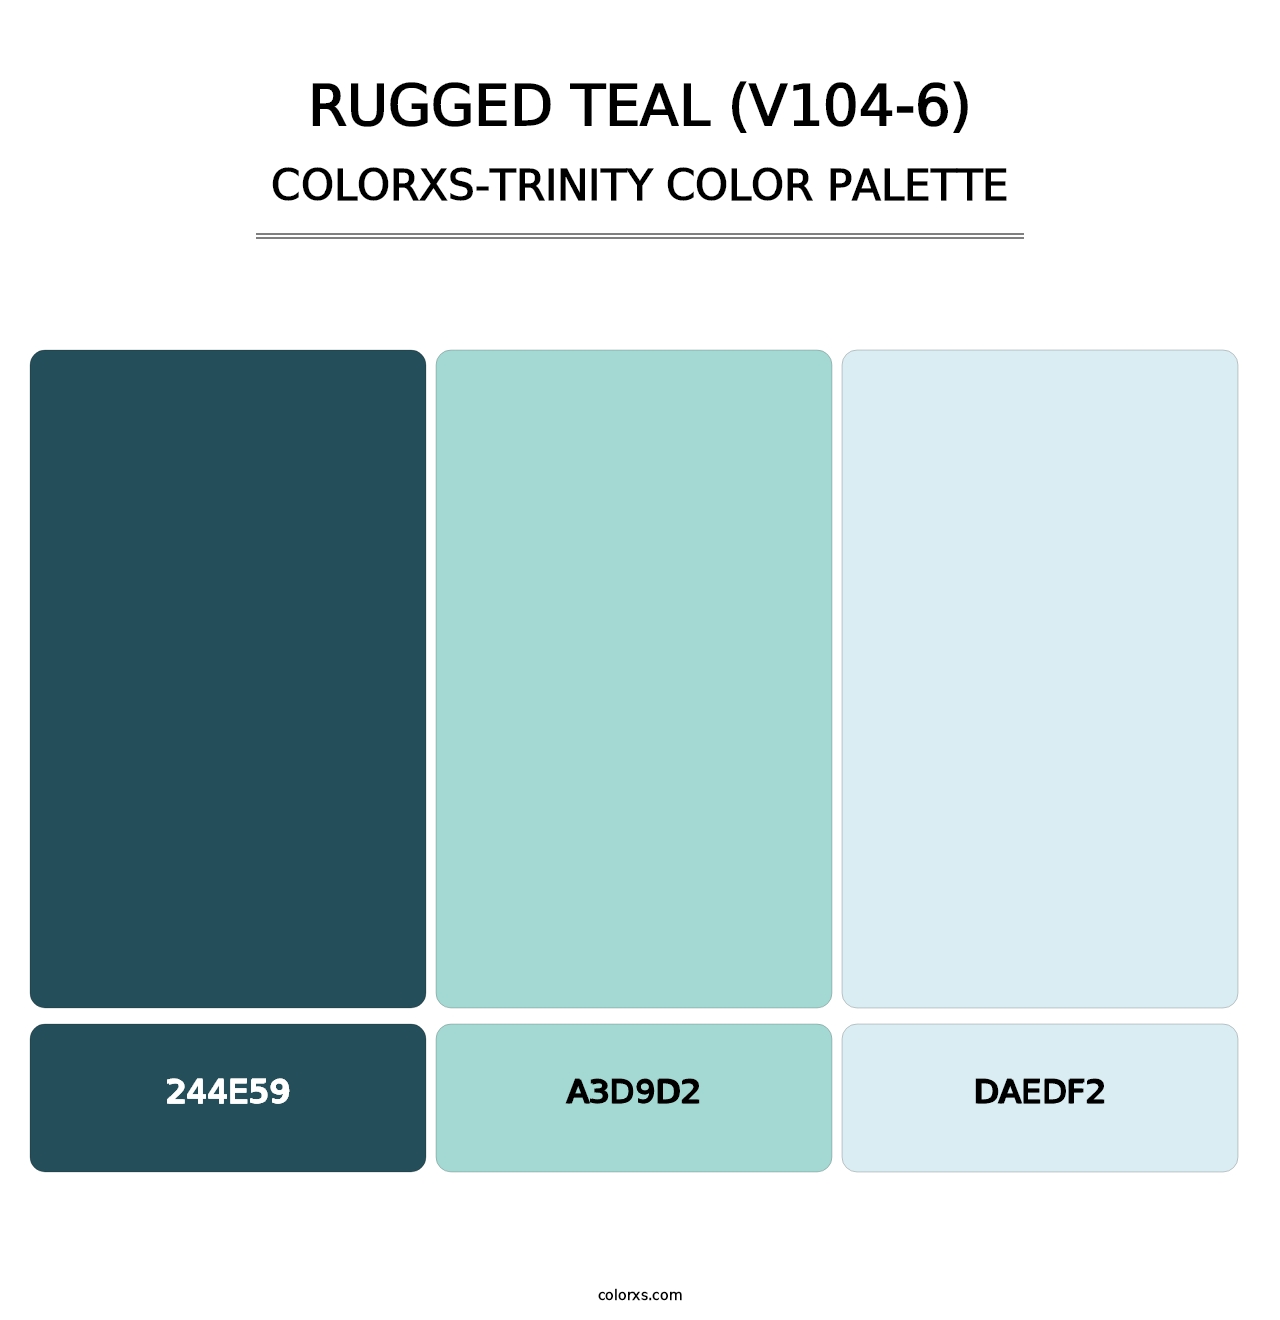 Rugged Teal (V104-6) - Colorxs Trinity Palette